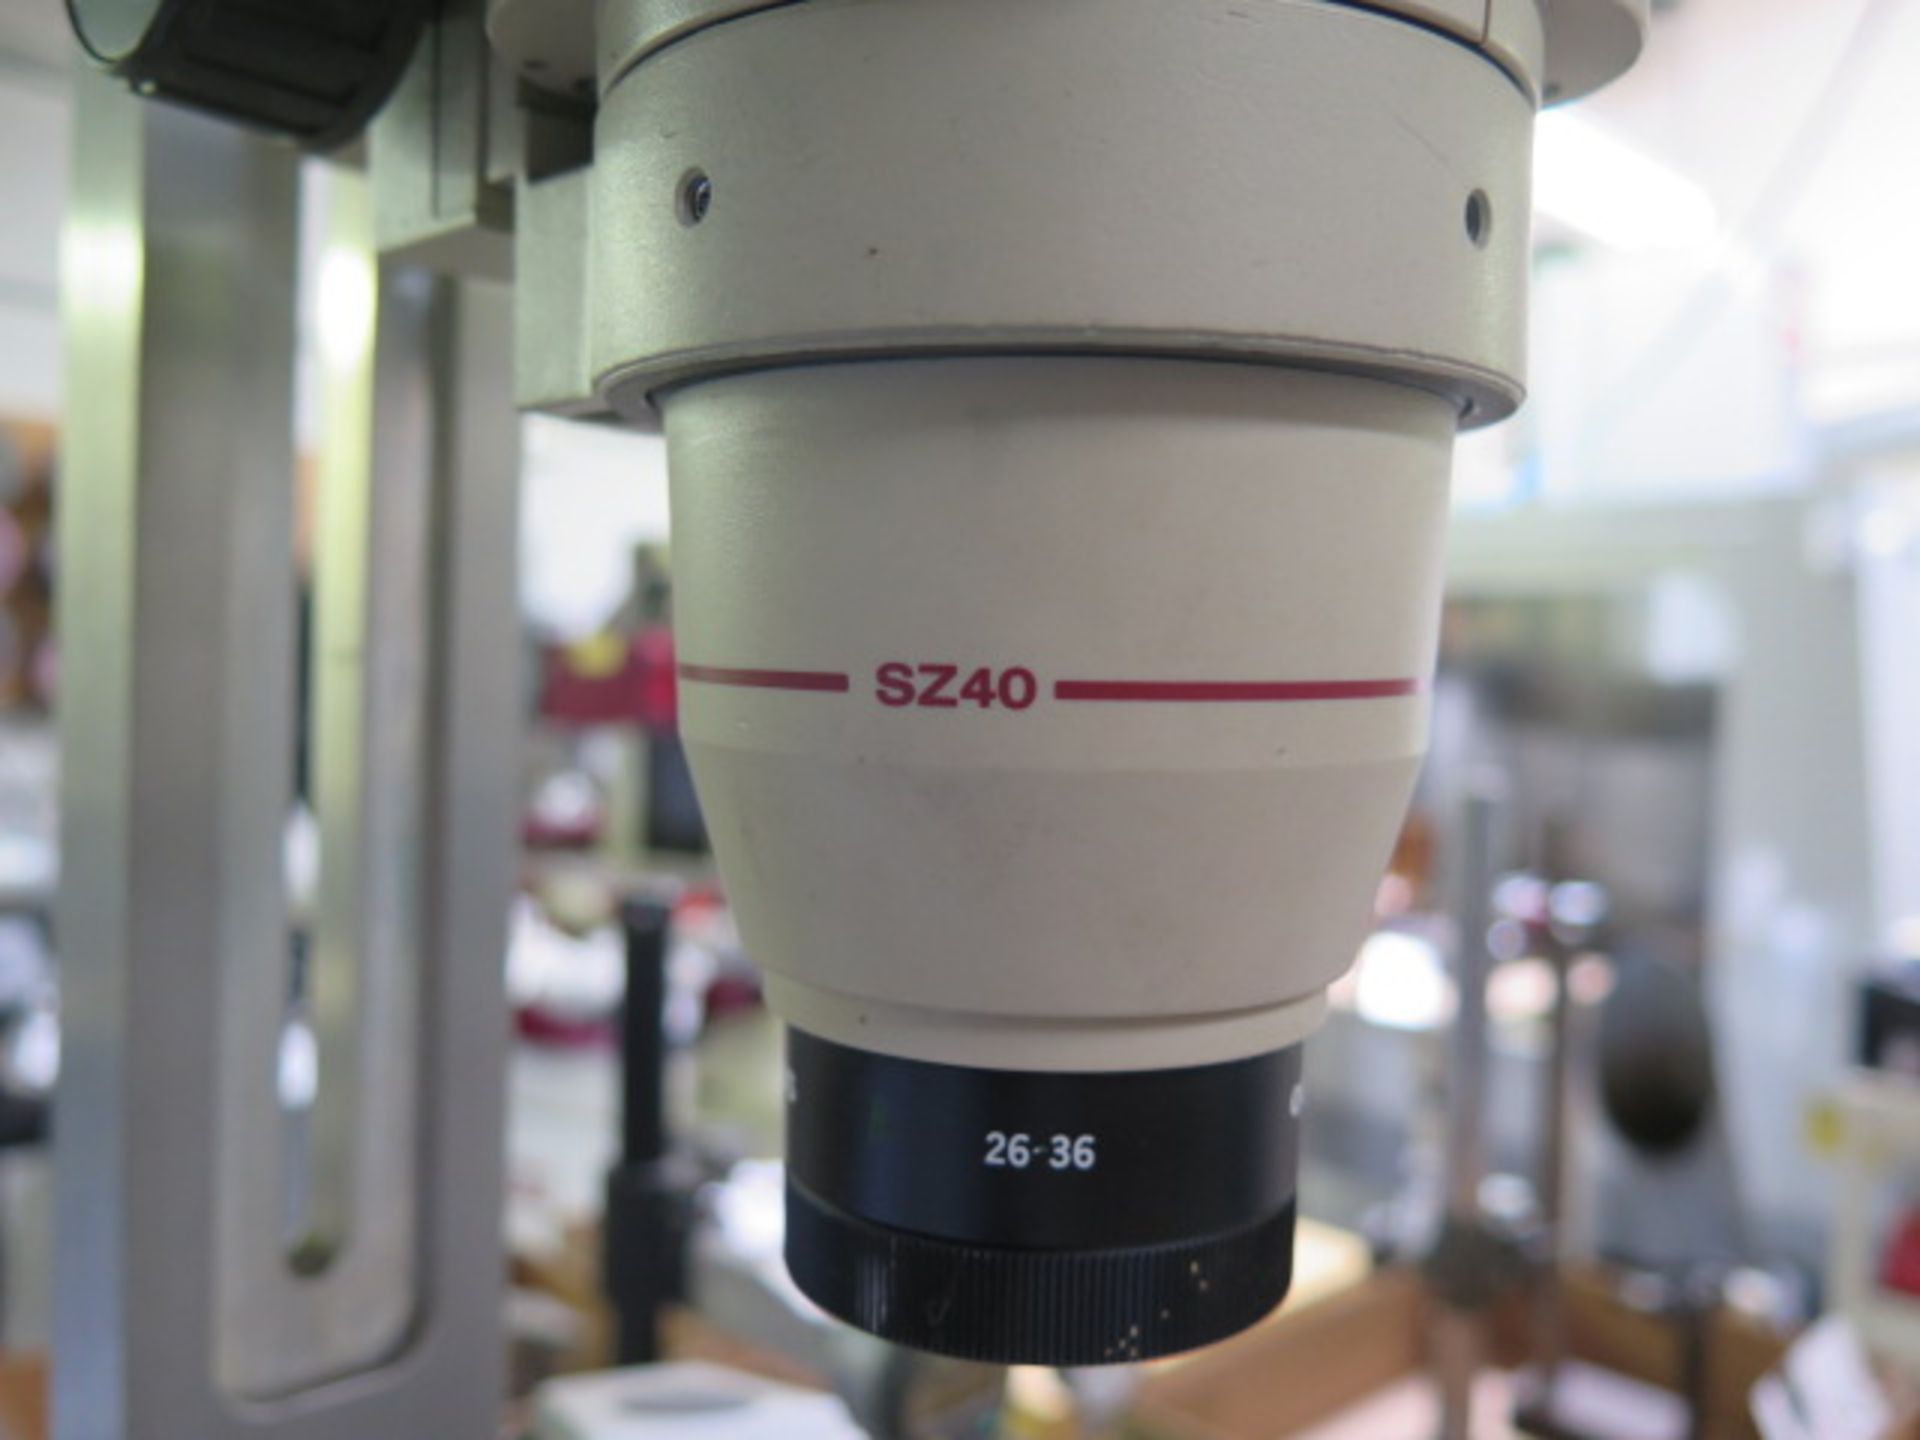 Olympus SZ40 Stereo Microscope w/ Granite Base, Extended Column, Light Source - Image 3 of 5